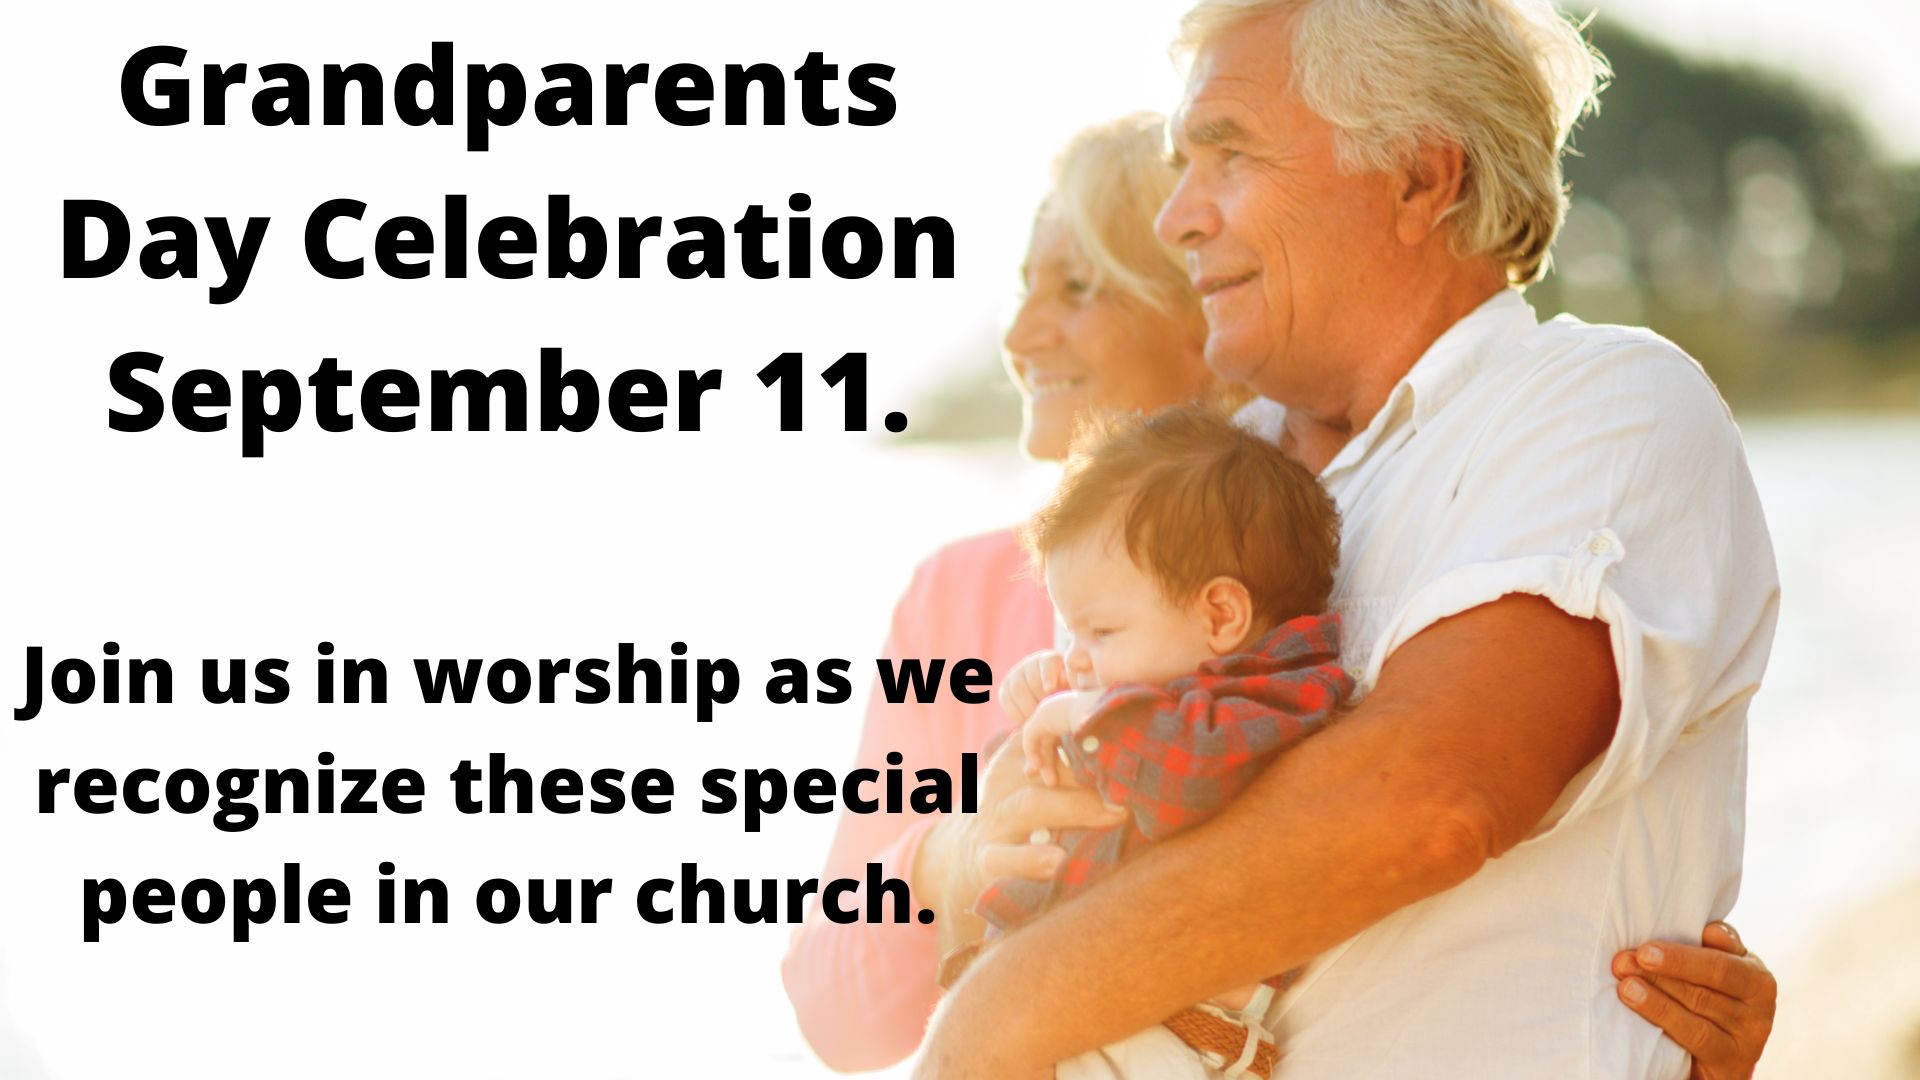 Featured image for “Grandparent’s Day Celebration”